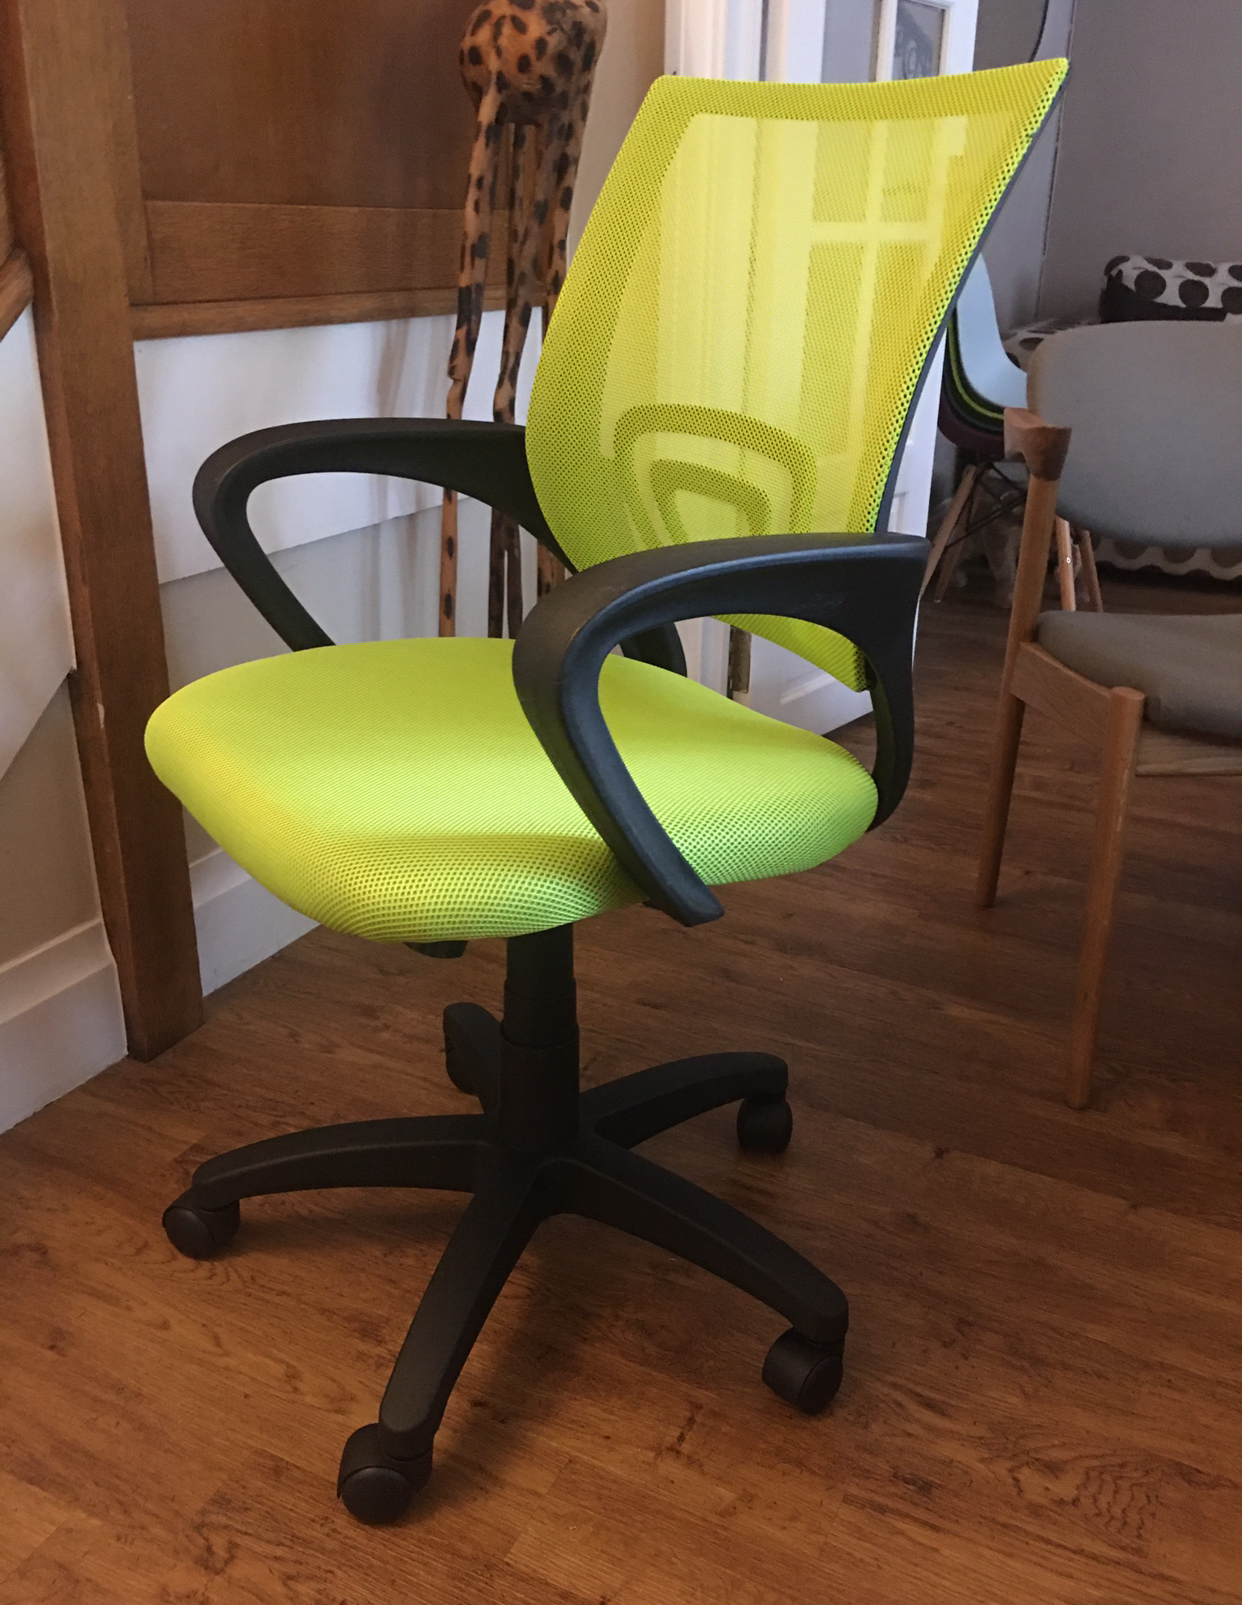 Student or Office mesh armchair  matching seat  and back colours Lime  green black base